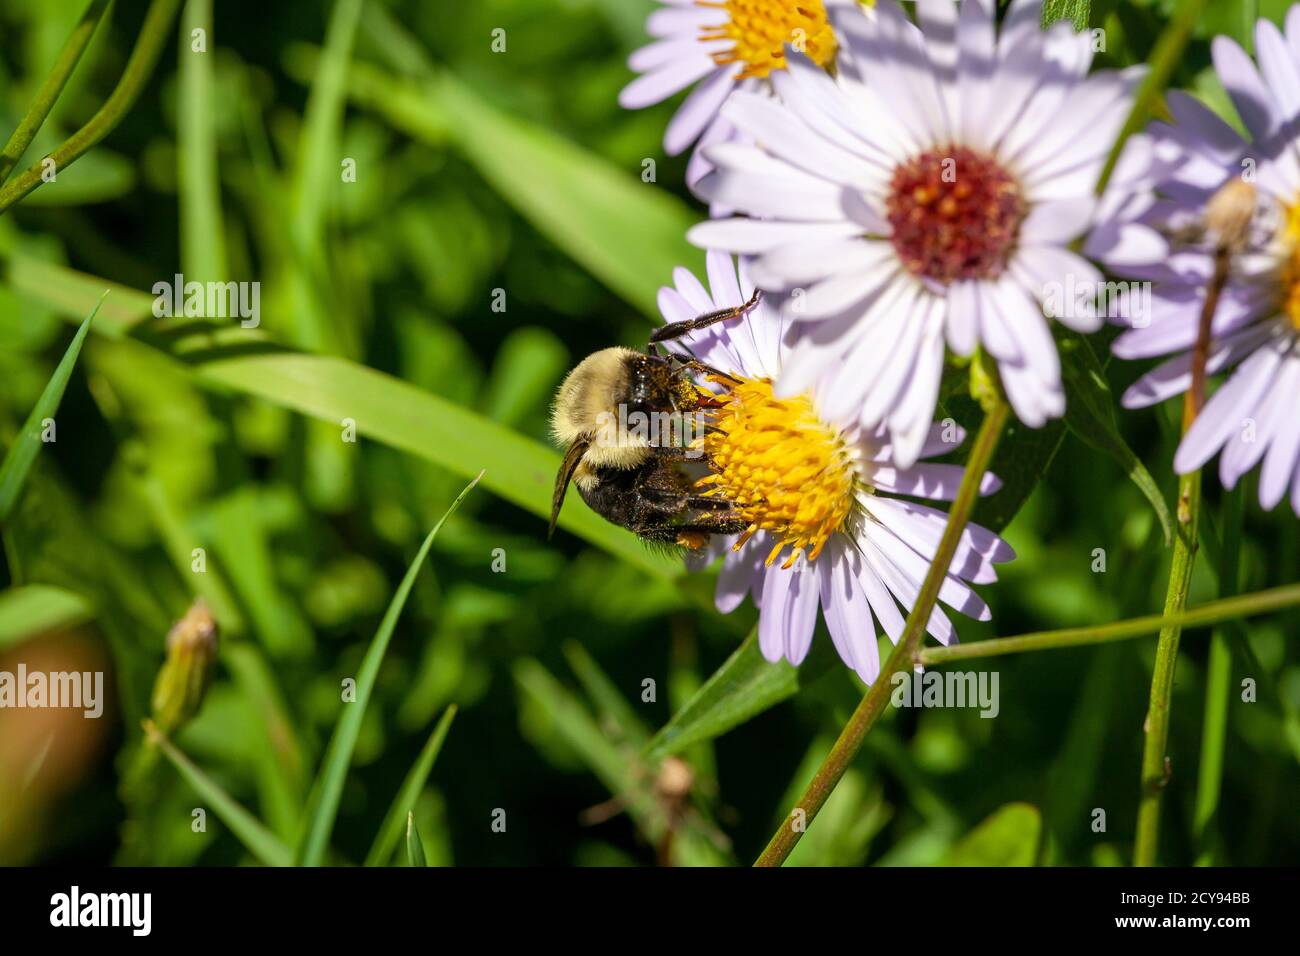 Bee collecting pollen on a flower of the daisy family Stock Photo